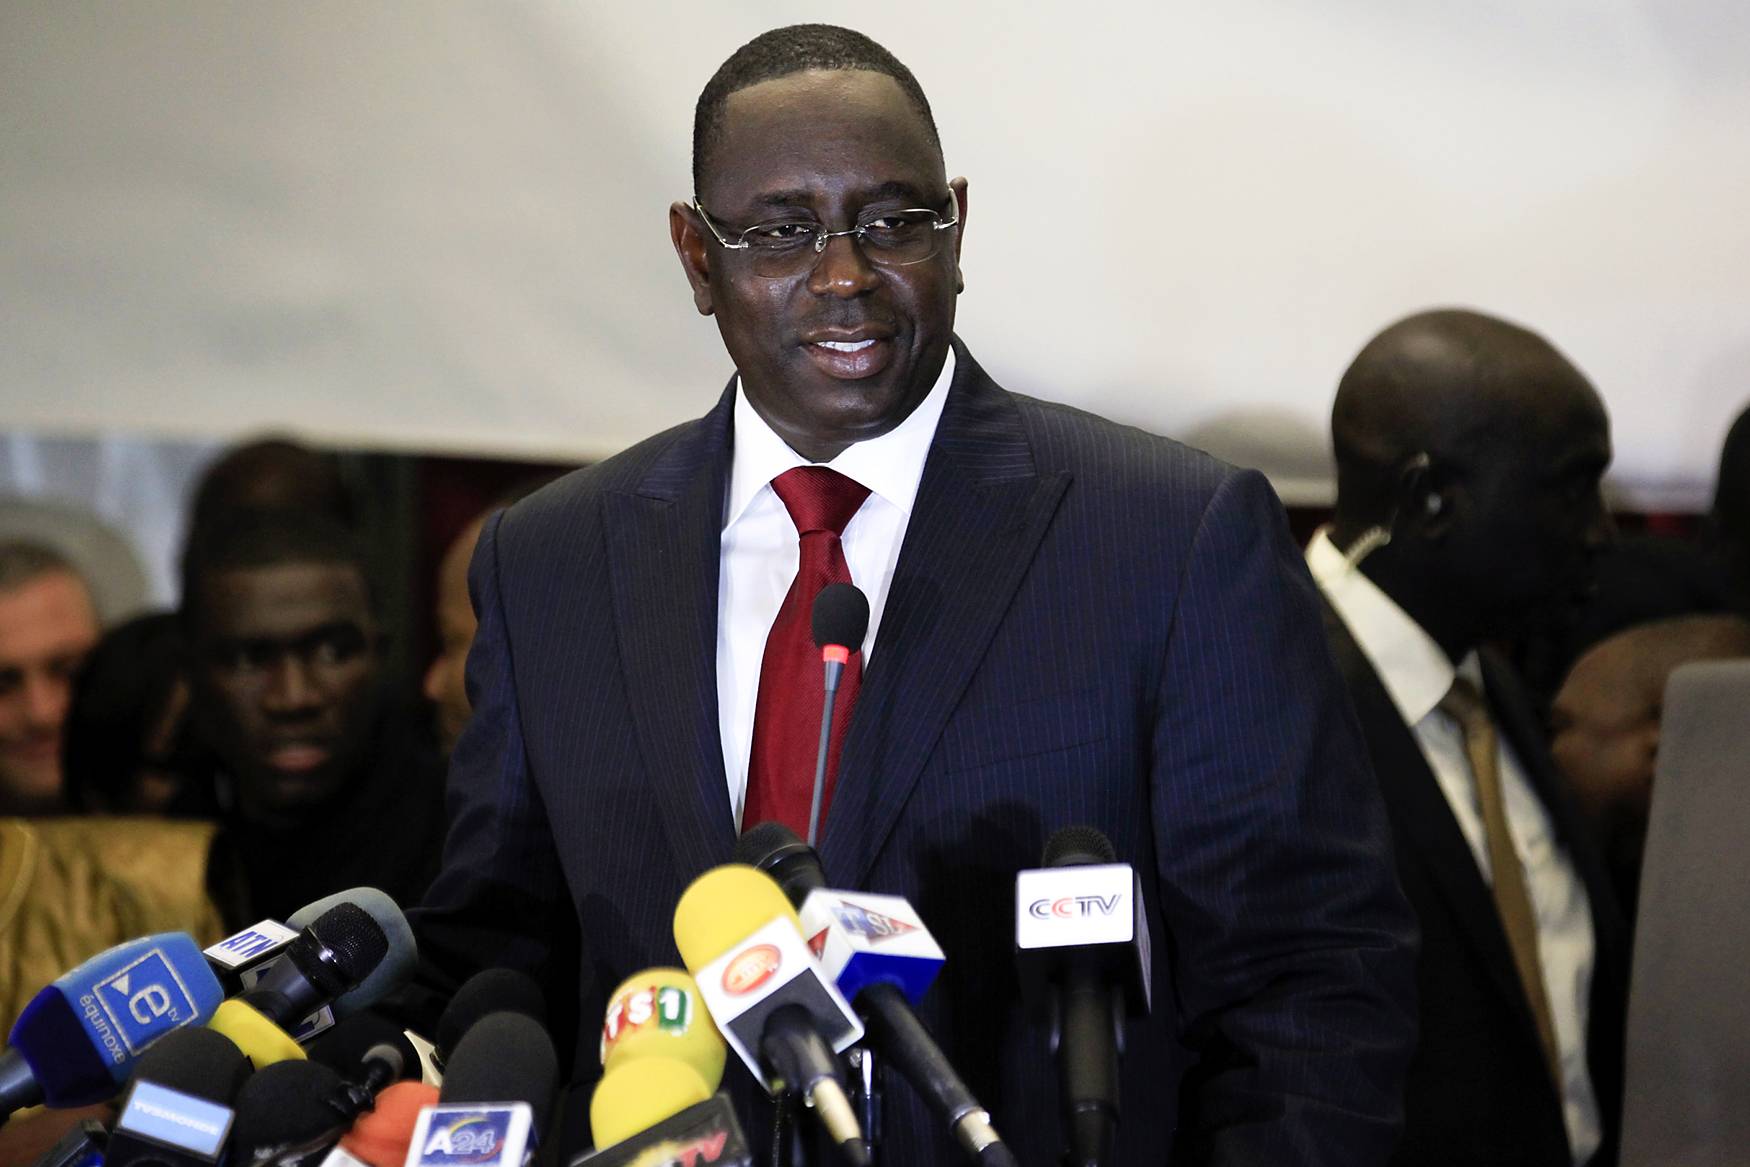 Senegal Peacefully Chooses New President - Former Prime Minister Macky Sall defeated incumbent President Abdoulaye Wade in Sunday’s run-off election. The smooth polling and Wade’s gracious concession of defeat have led many to call the election a &quot;great victory for democracy&quot; in Africa.\r(Photo: REUTERS/Joe Penney)